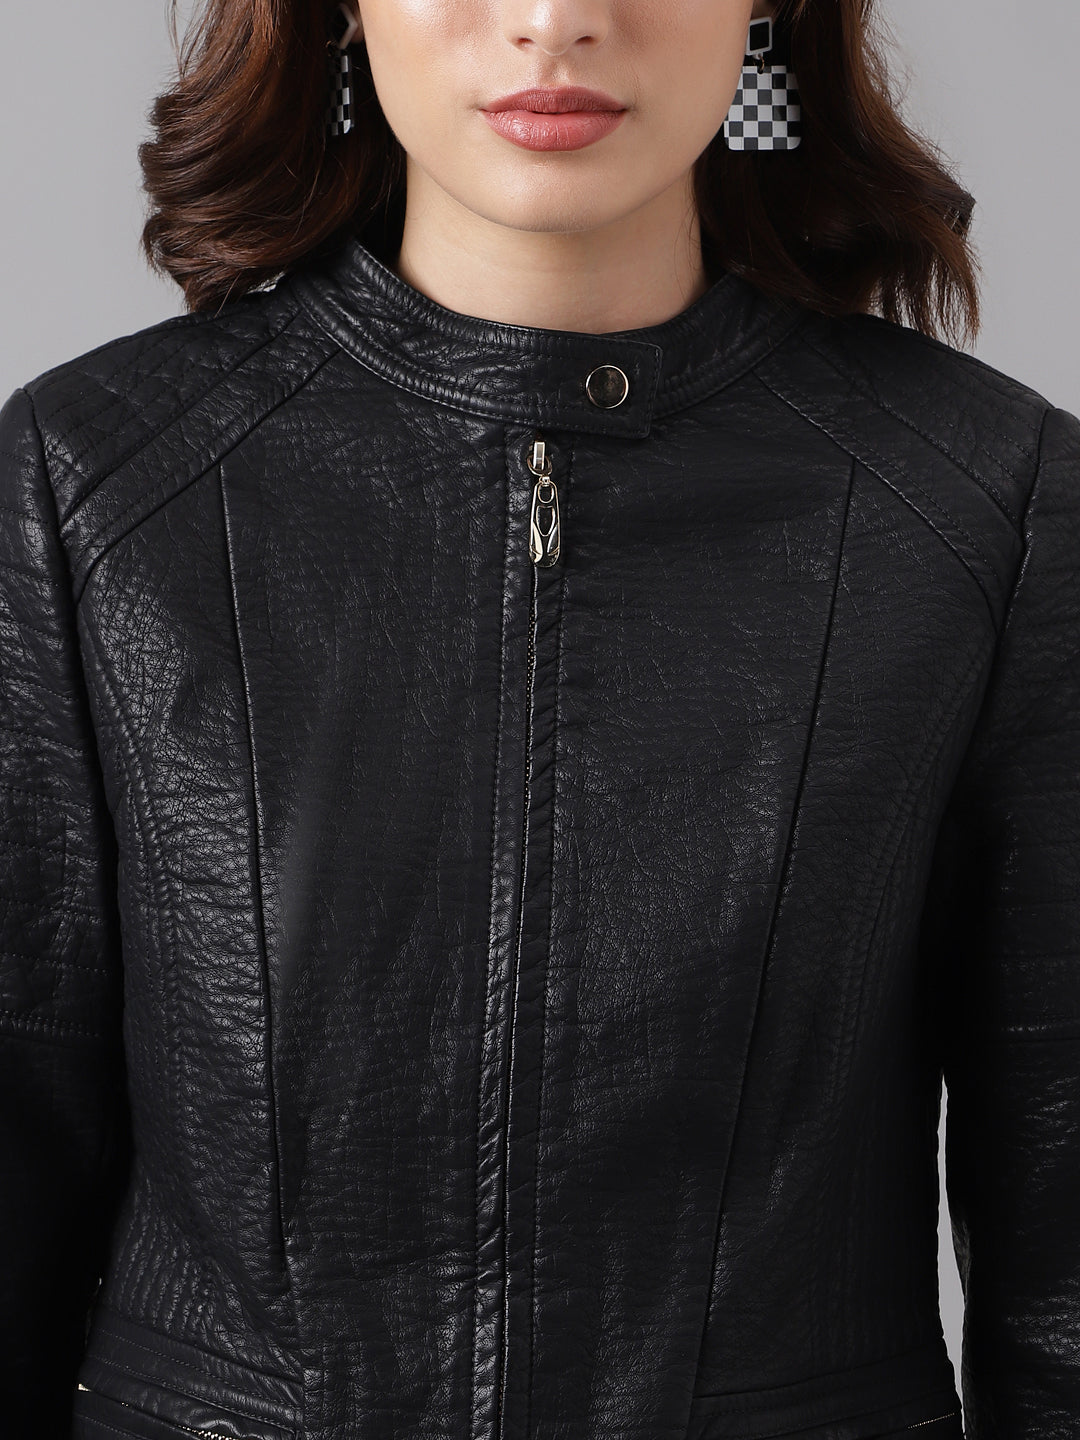 Black Full Sleeve Round Neck Solid Straight Jacket With Pocket for Women